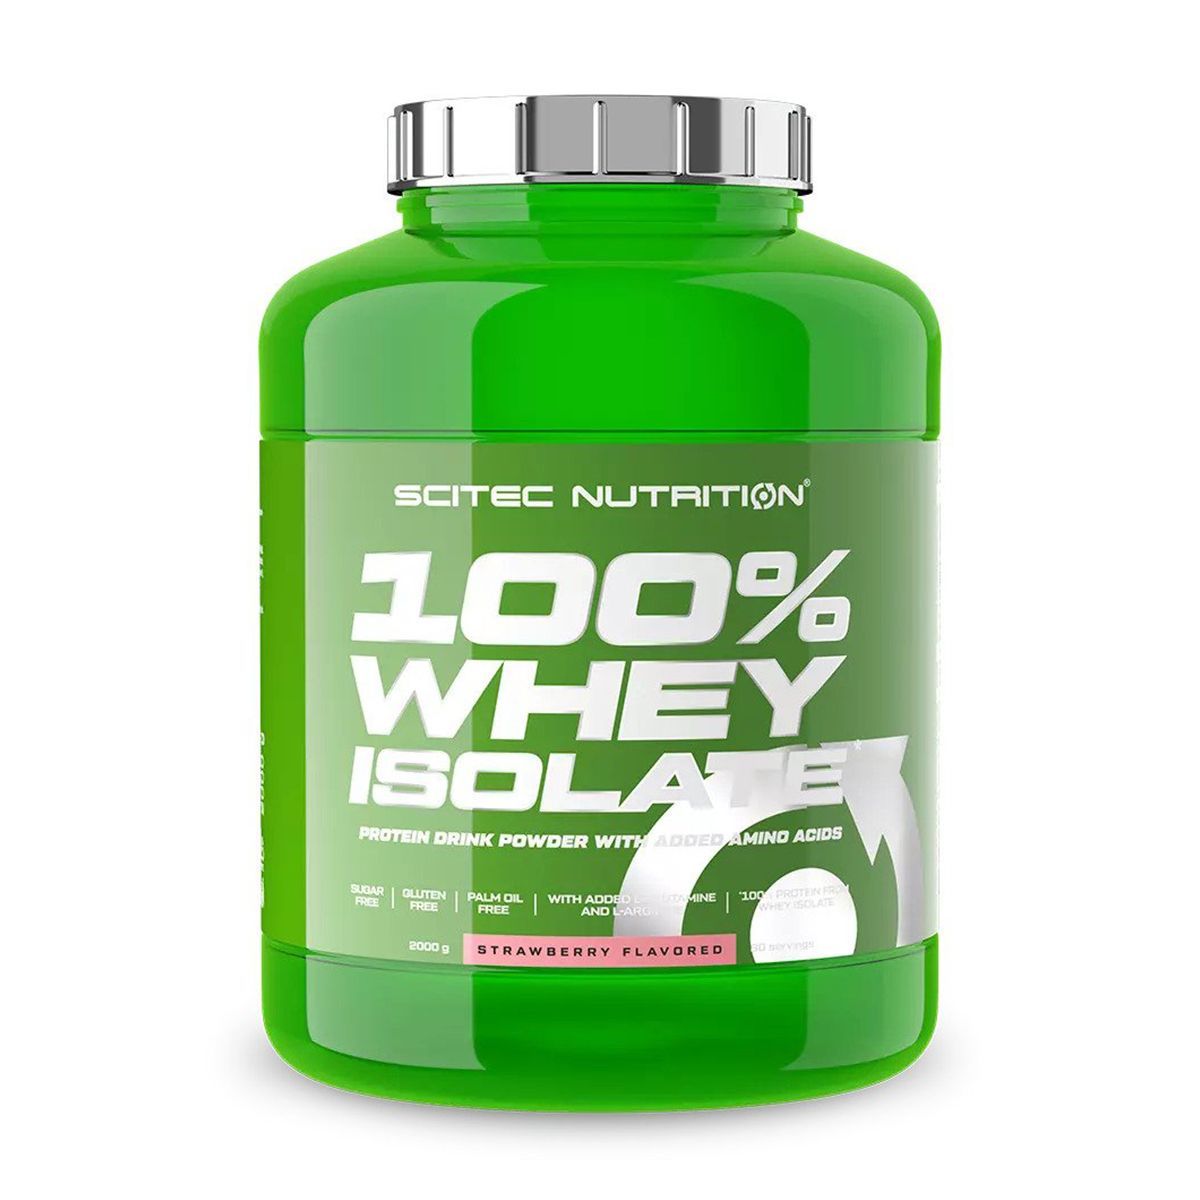 Scitec Nutrition - 100% Whey Isolate - 2000g